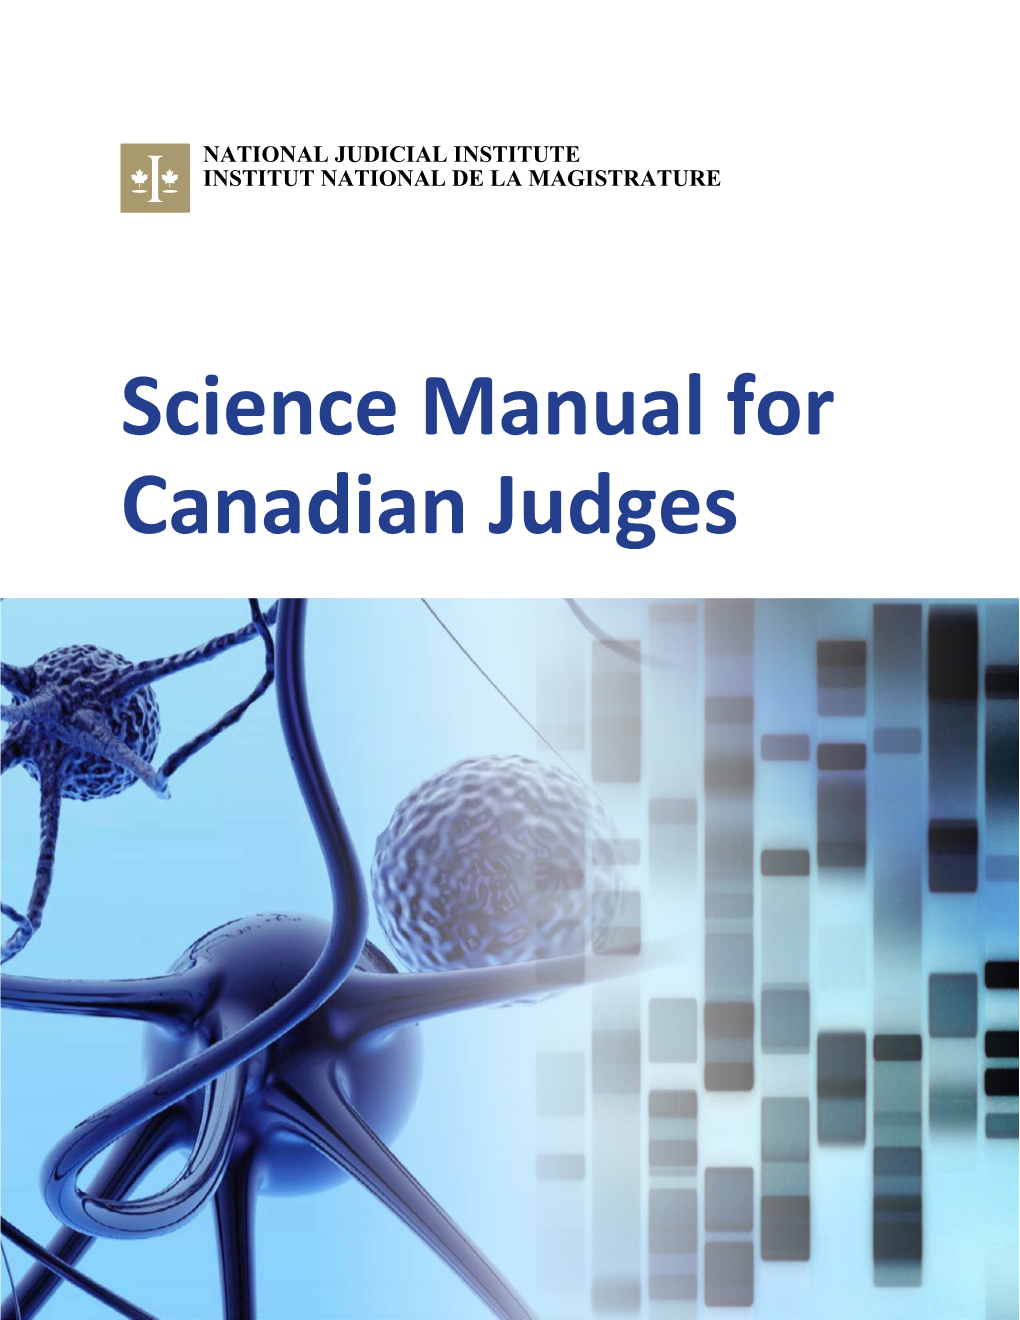 Science Manual for Canadian Judges